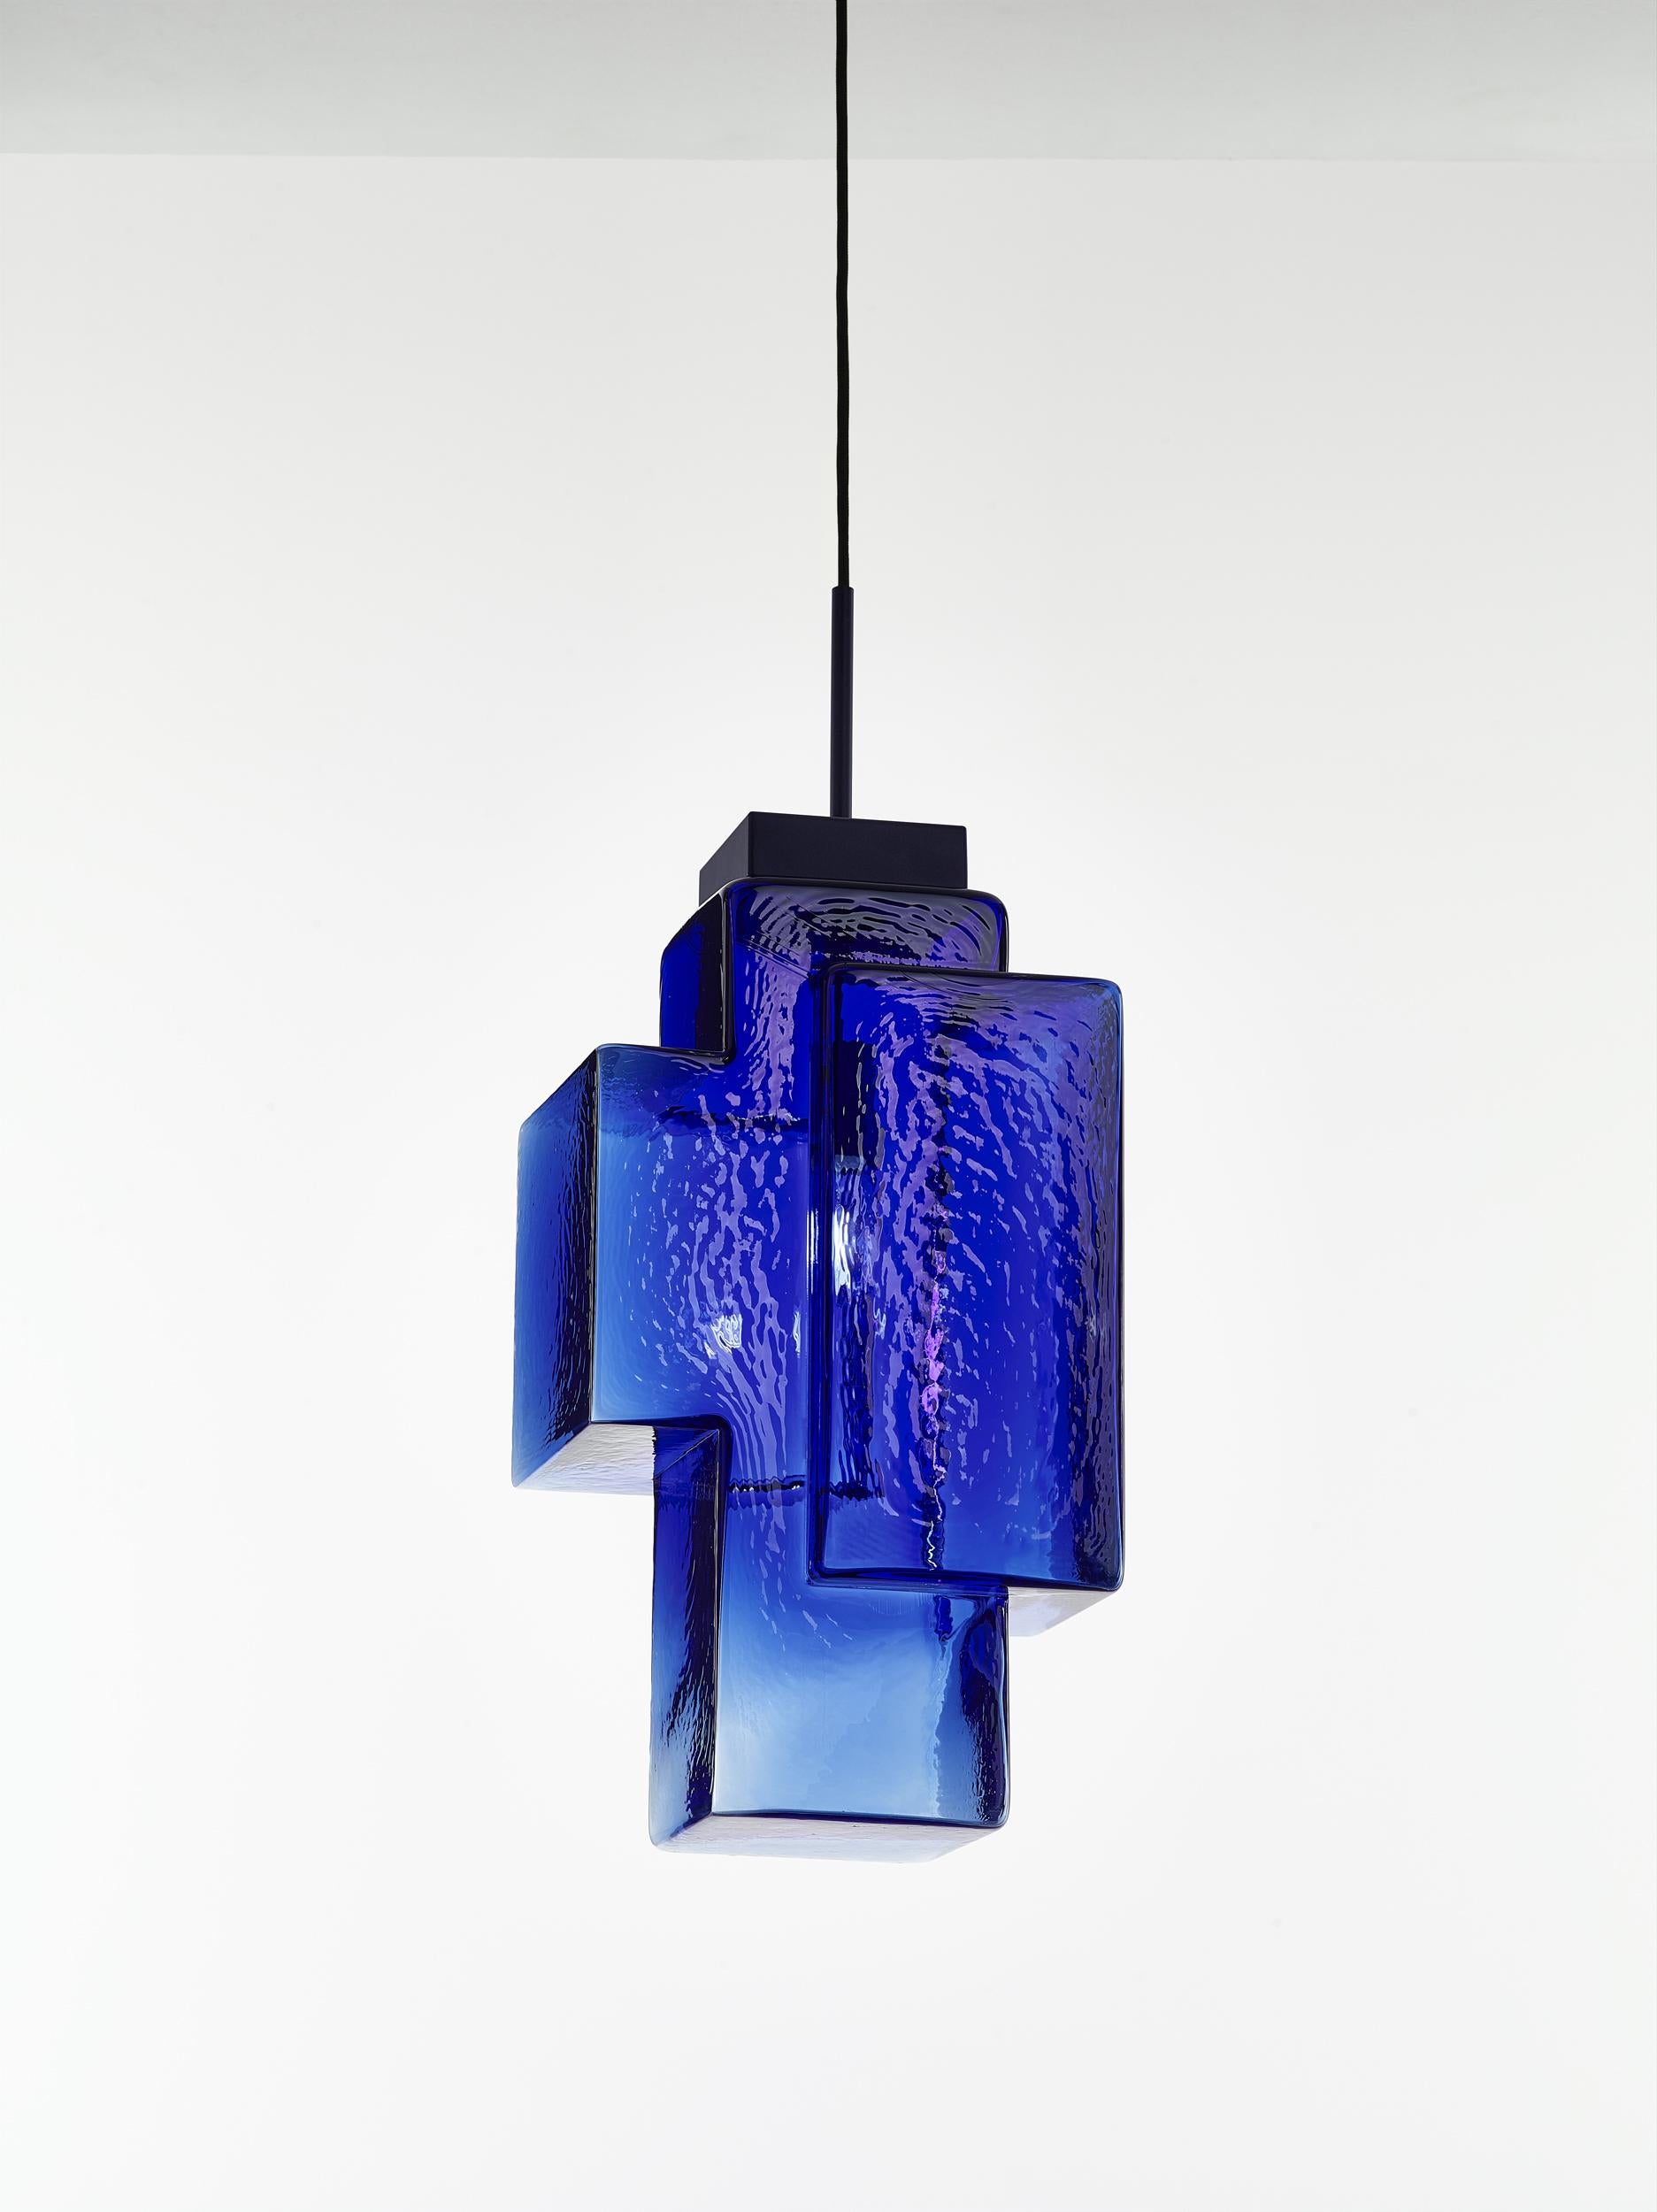 Set of 2 cobalt blue Tetris pendant light by Dechem Studio
Dimensions: W 30 x D 23 x H 200 cm
Materials: metal, glass.
Also available: different colours available,

In this complex lighting fixture, strict geometric and architectural lines